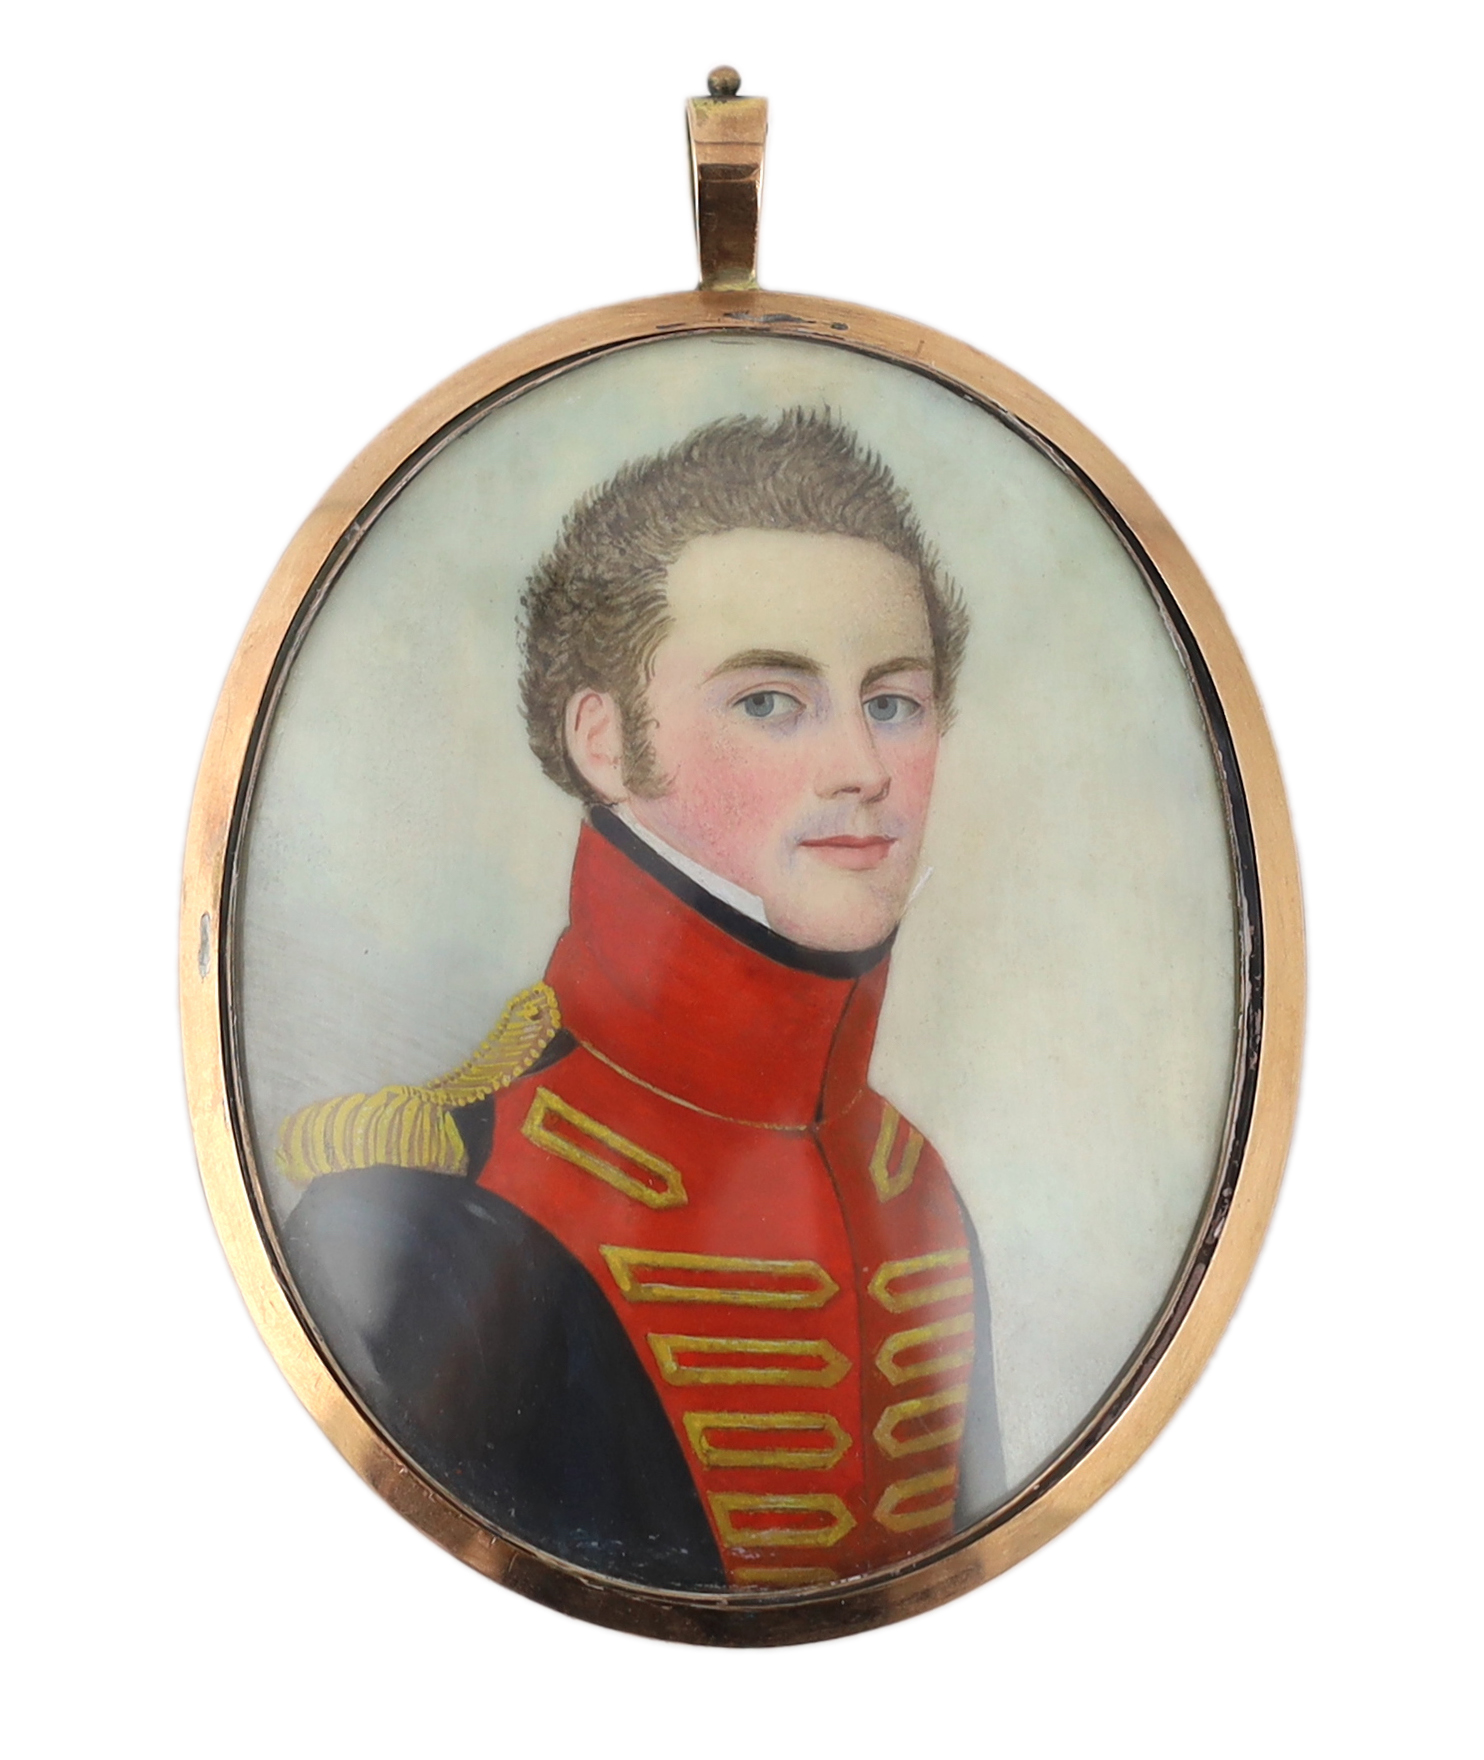 Frederick Buck (Irish, 1771-1840), Portrait miniature of an army officer, watercolour on ivory, 6.8 x 5.1cm. CITES Submission reference GSQYEK3F